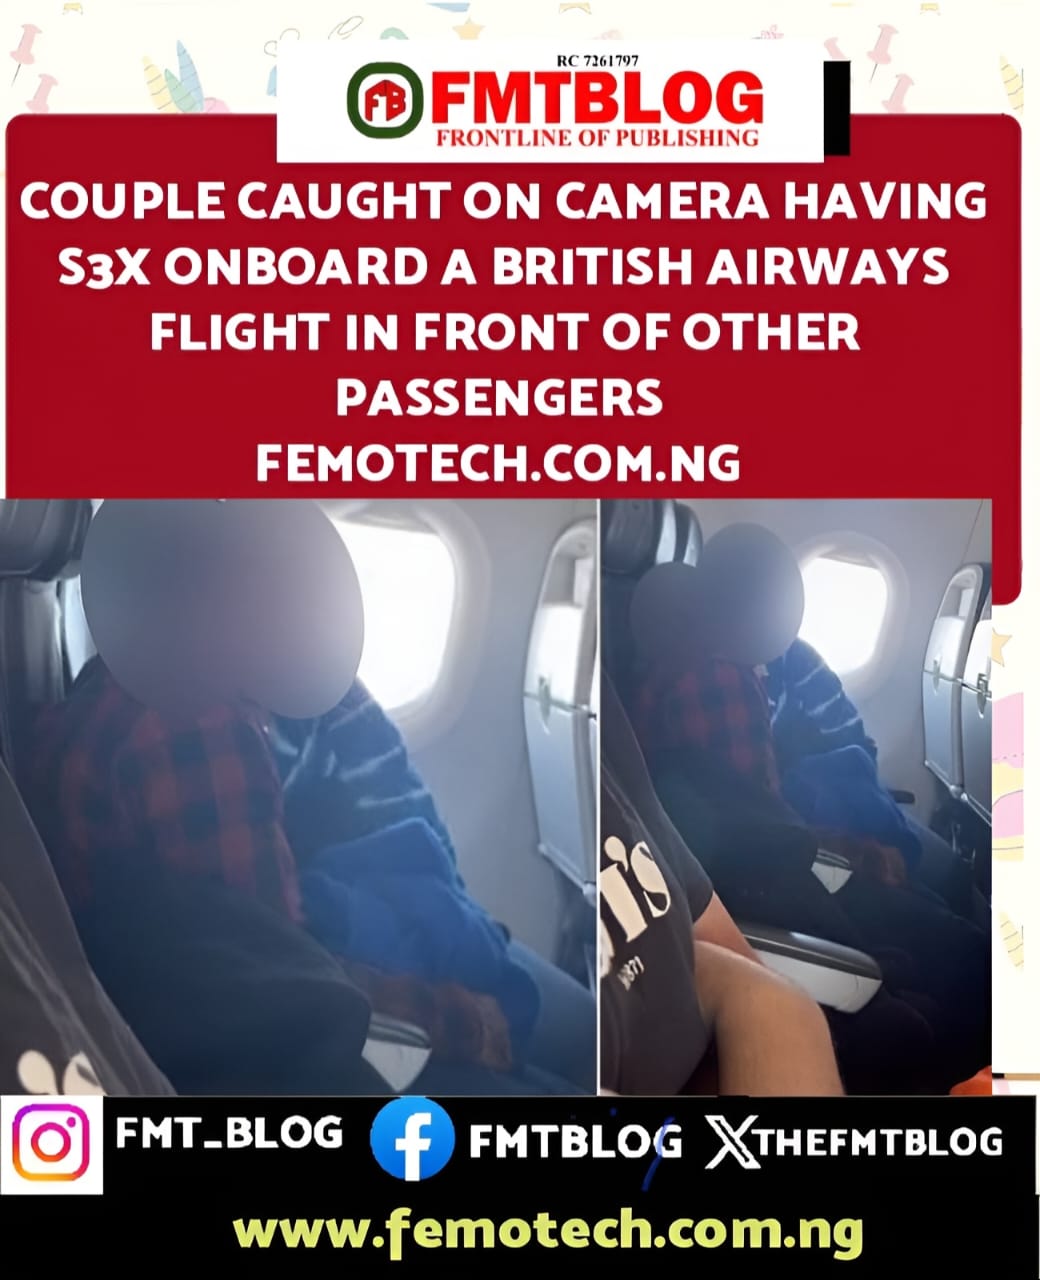 Couple Caught On Camera Having S3x Onboard A British Airways Flight In Front Of Other Passengers (VIDEO)